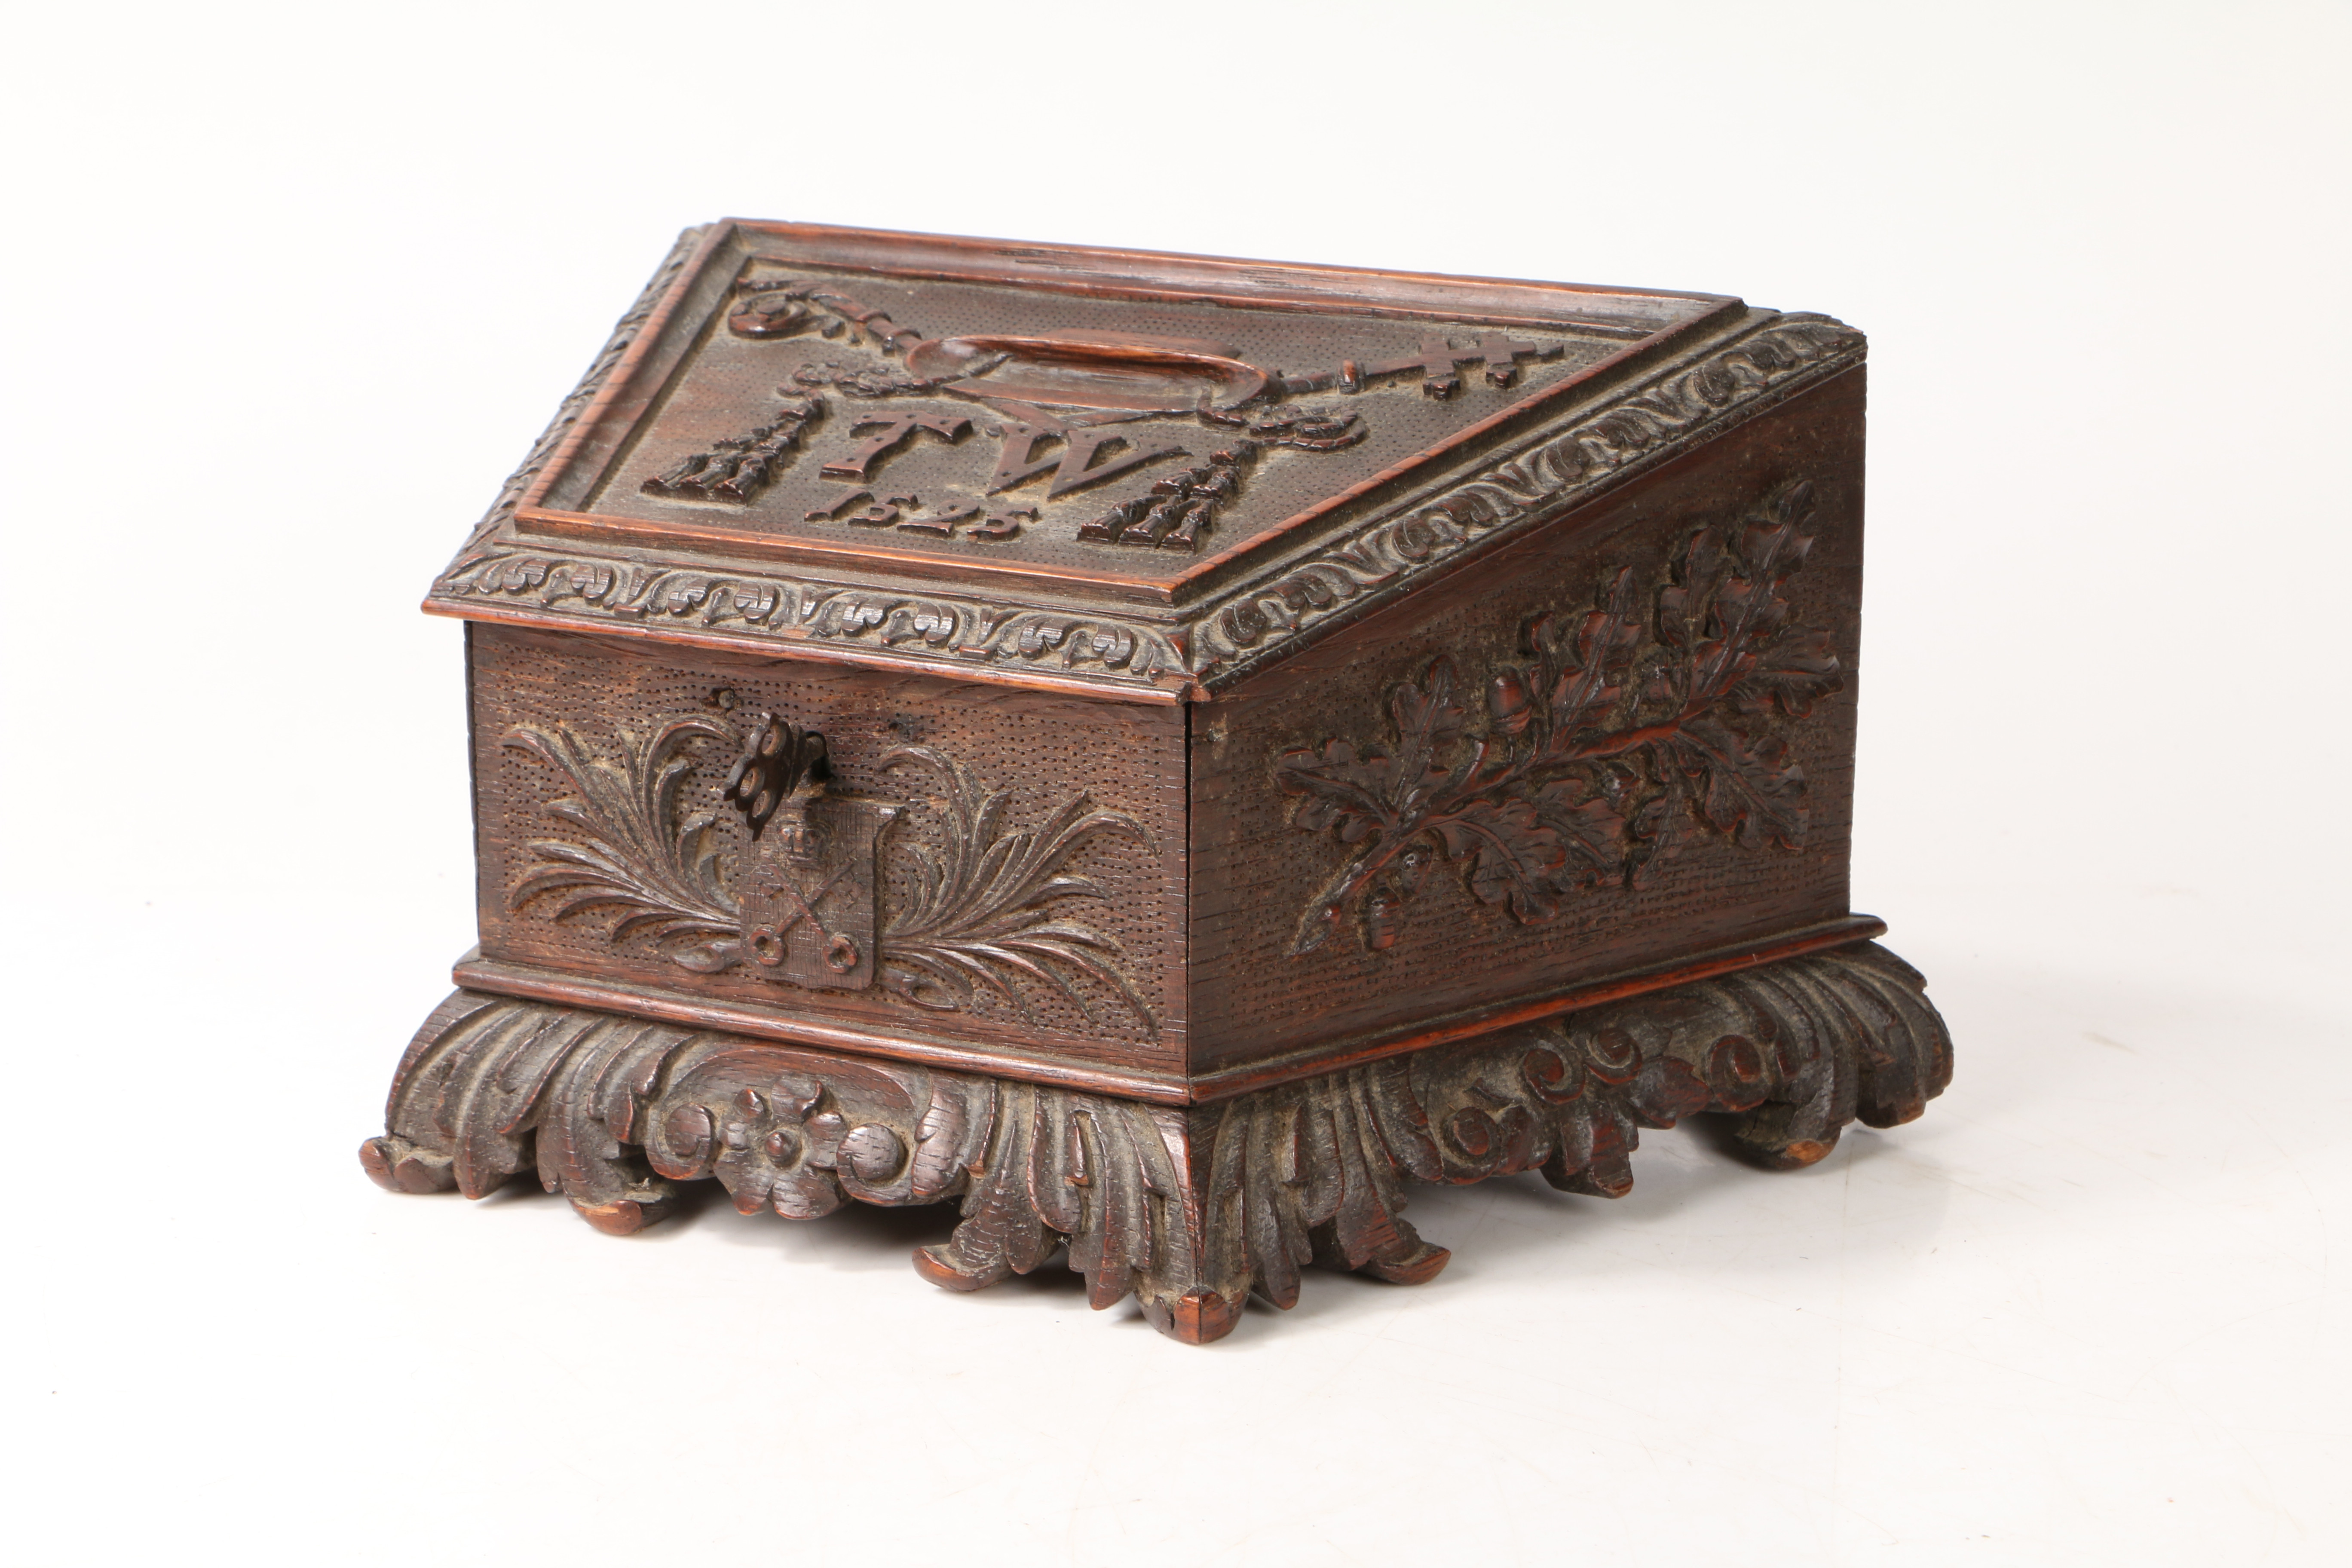 CHRIST CHURCH INTEREST - A 19TH CENTURY CARVED OAK BOX. - Image 4 of 10